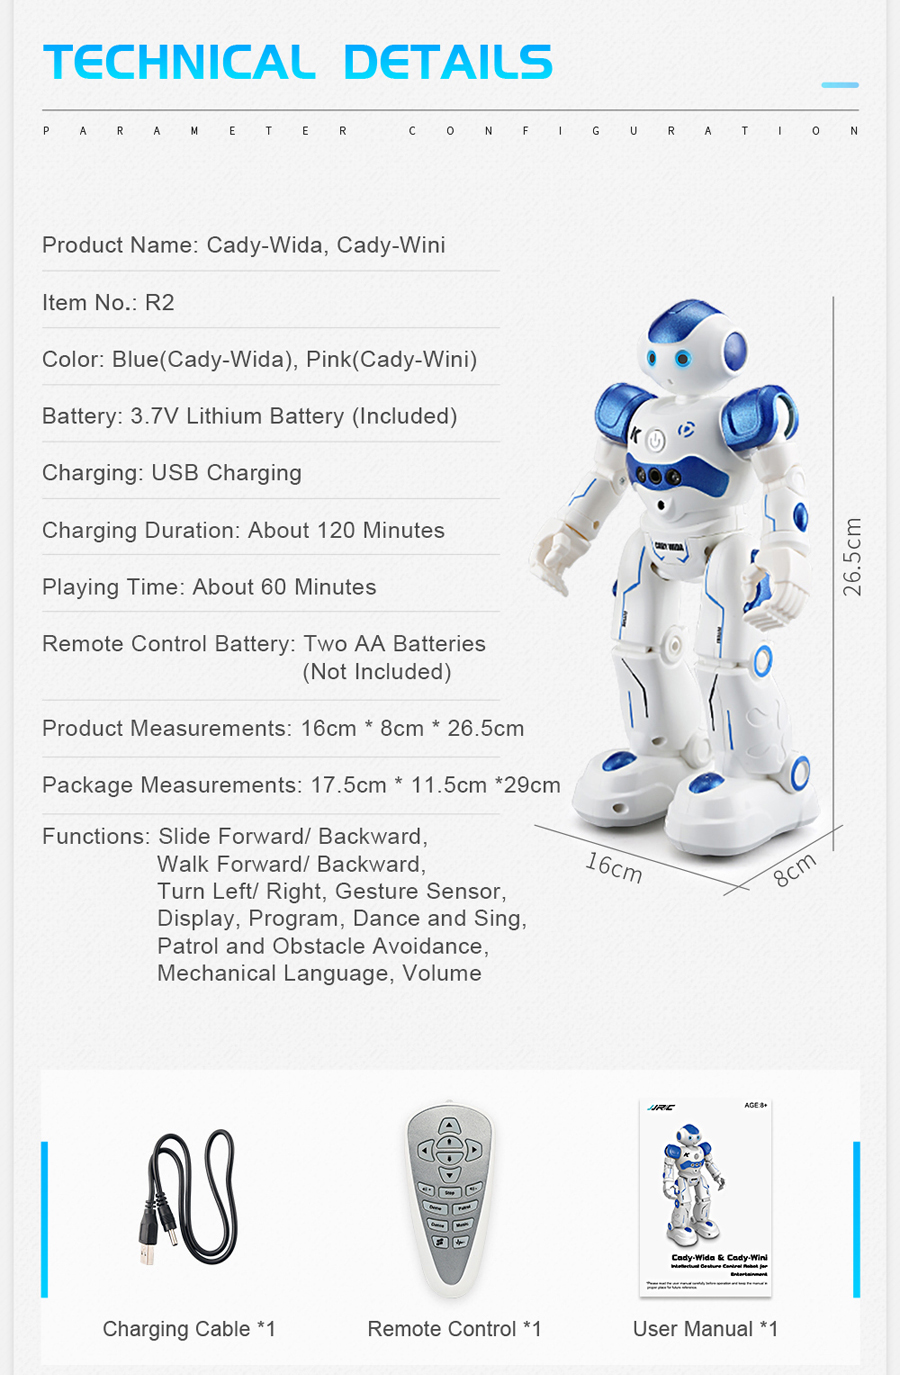 JJRC R2 Cady USB Charging Dancing Gesture Control Robot Toy 59